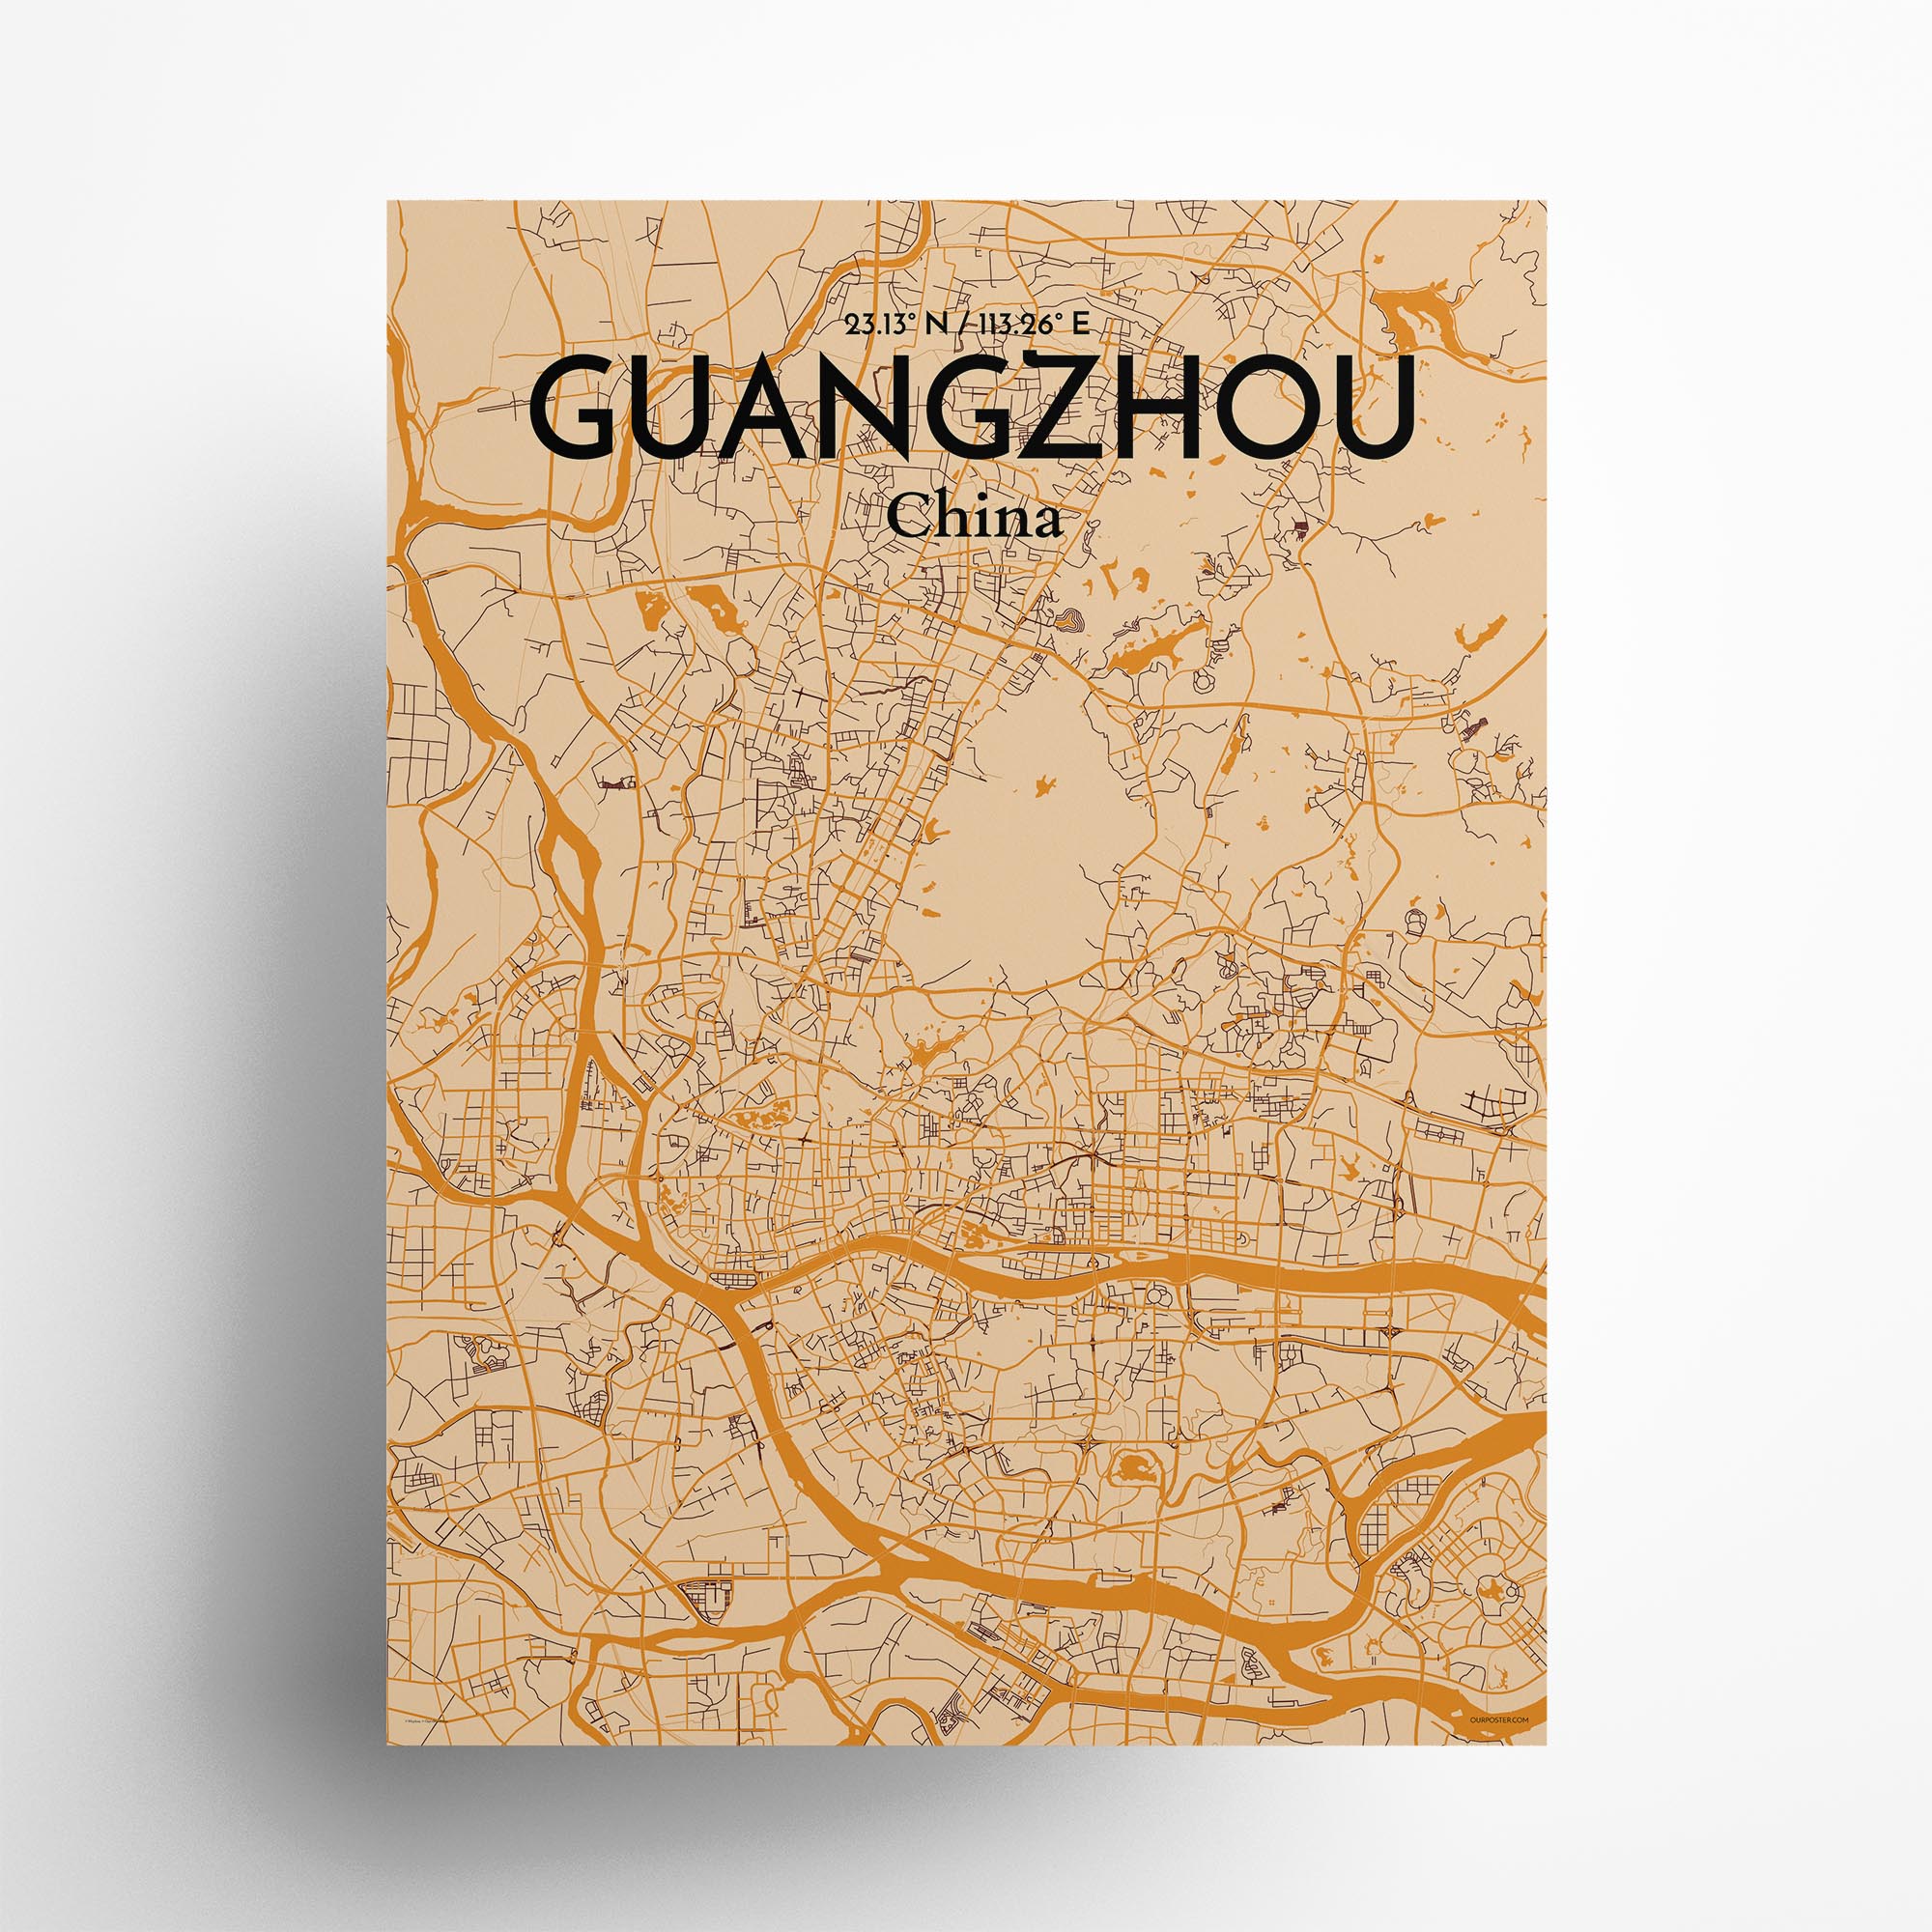 Guangzhou city map poster in Vintage of size 18" x 24"